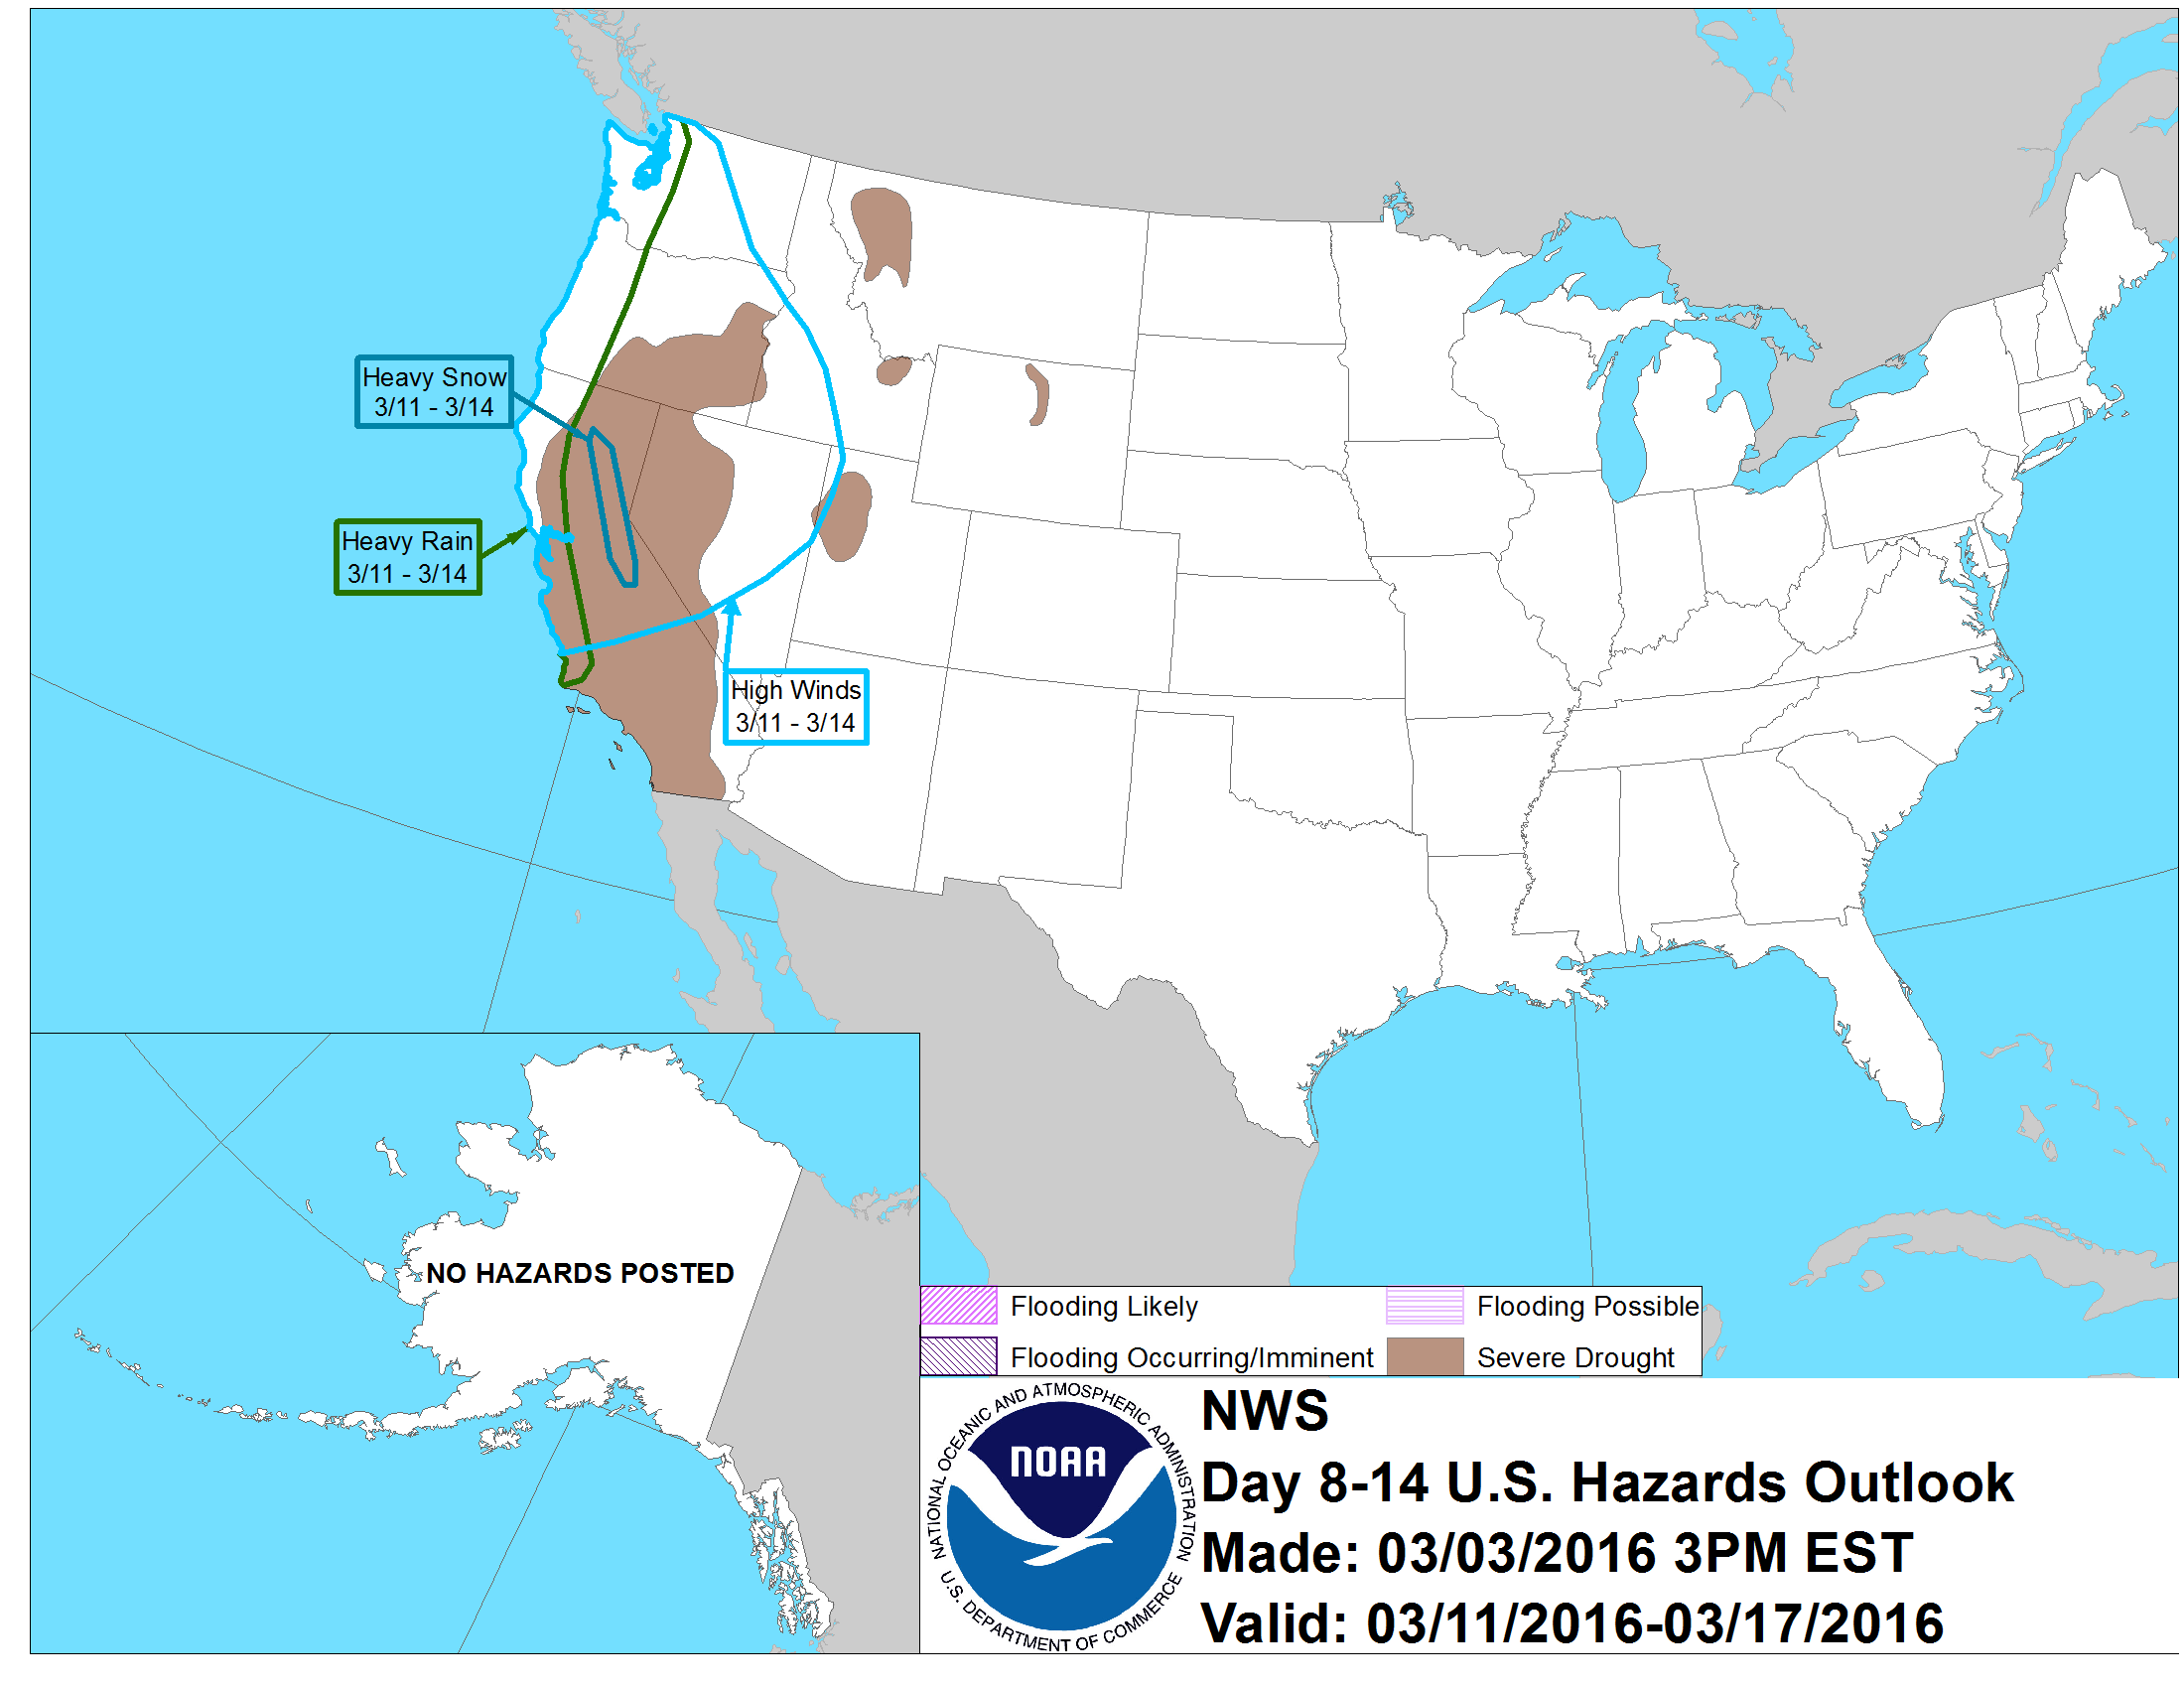 NOAA is forecasting "Heavy Snow" in California from March 11-14th.  image:  noaa, today